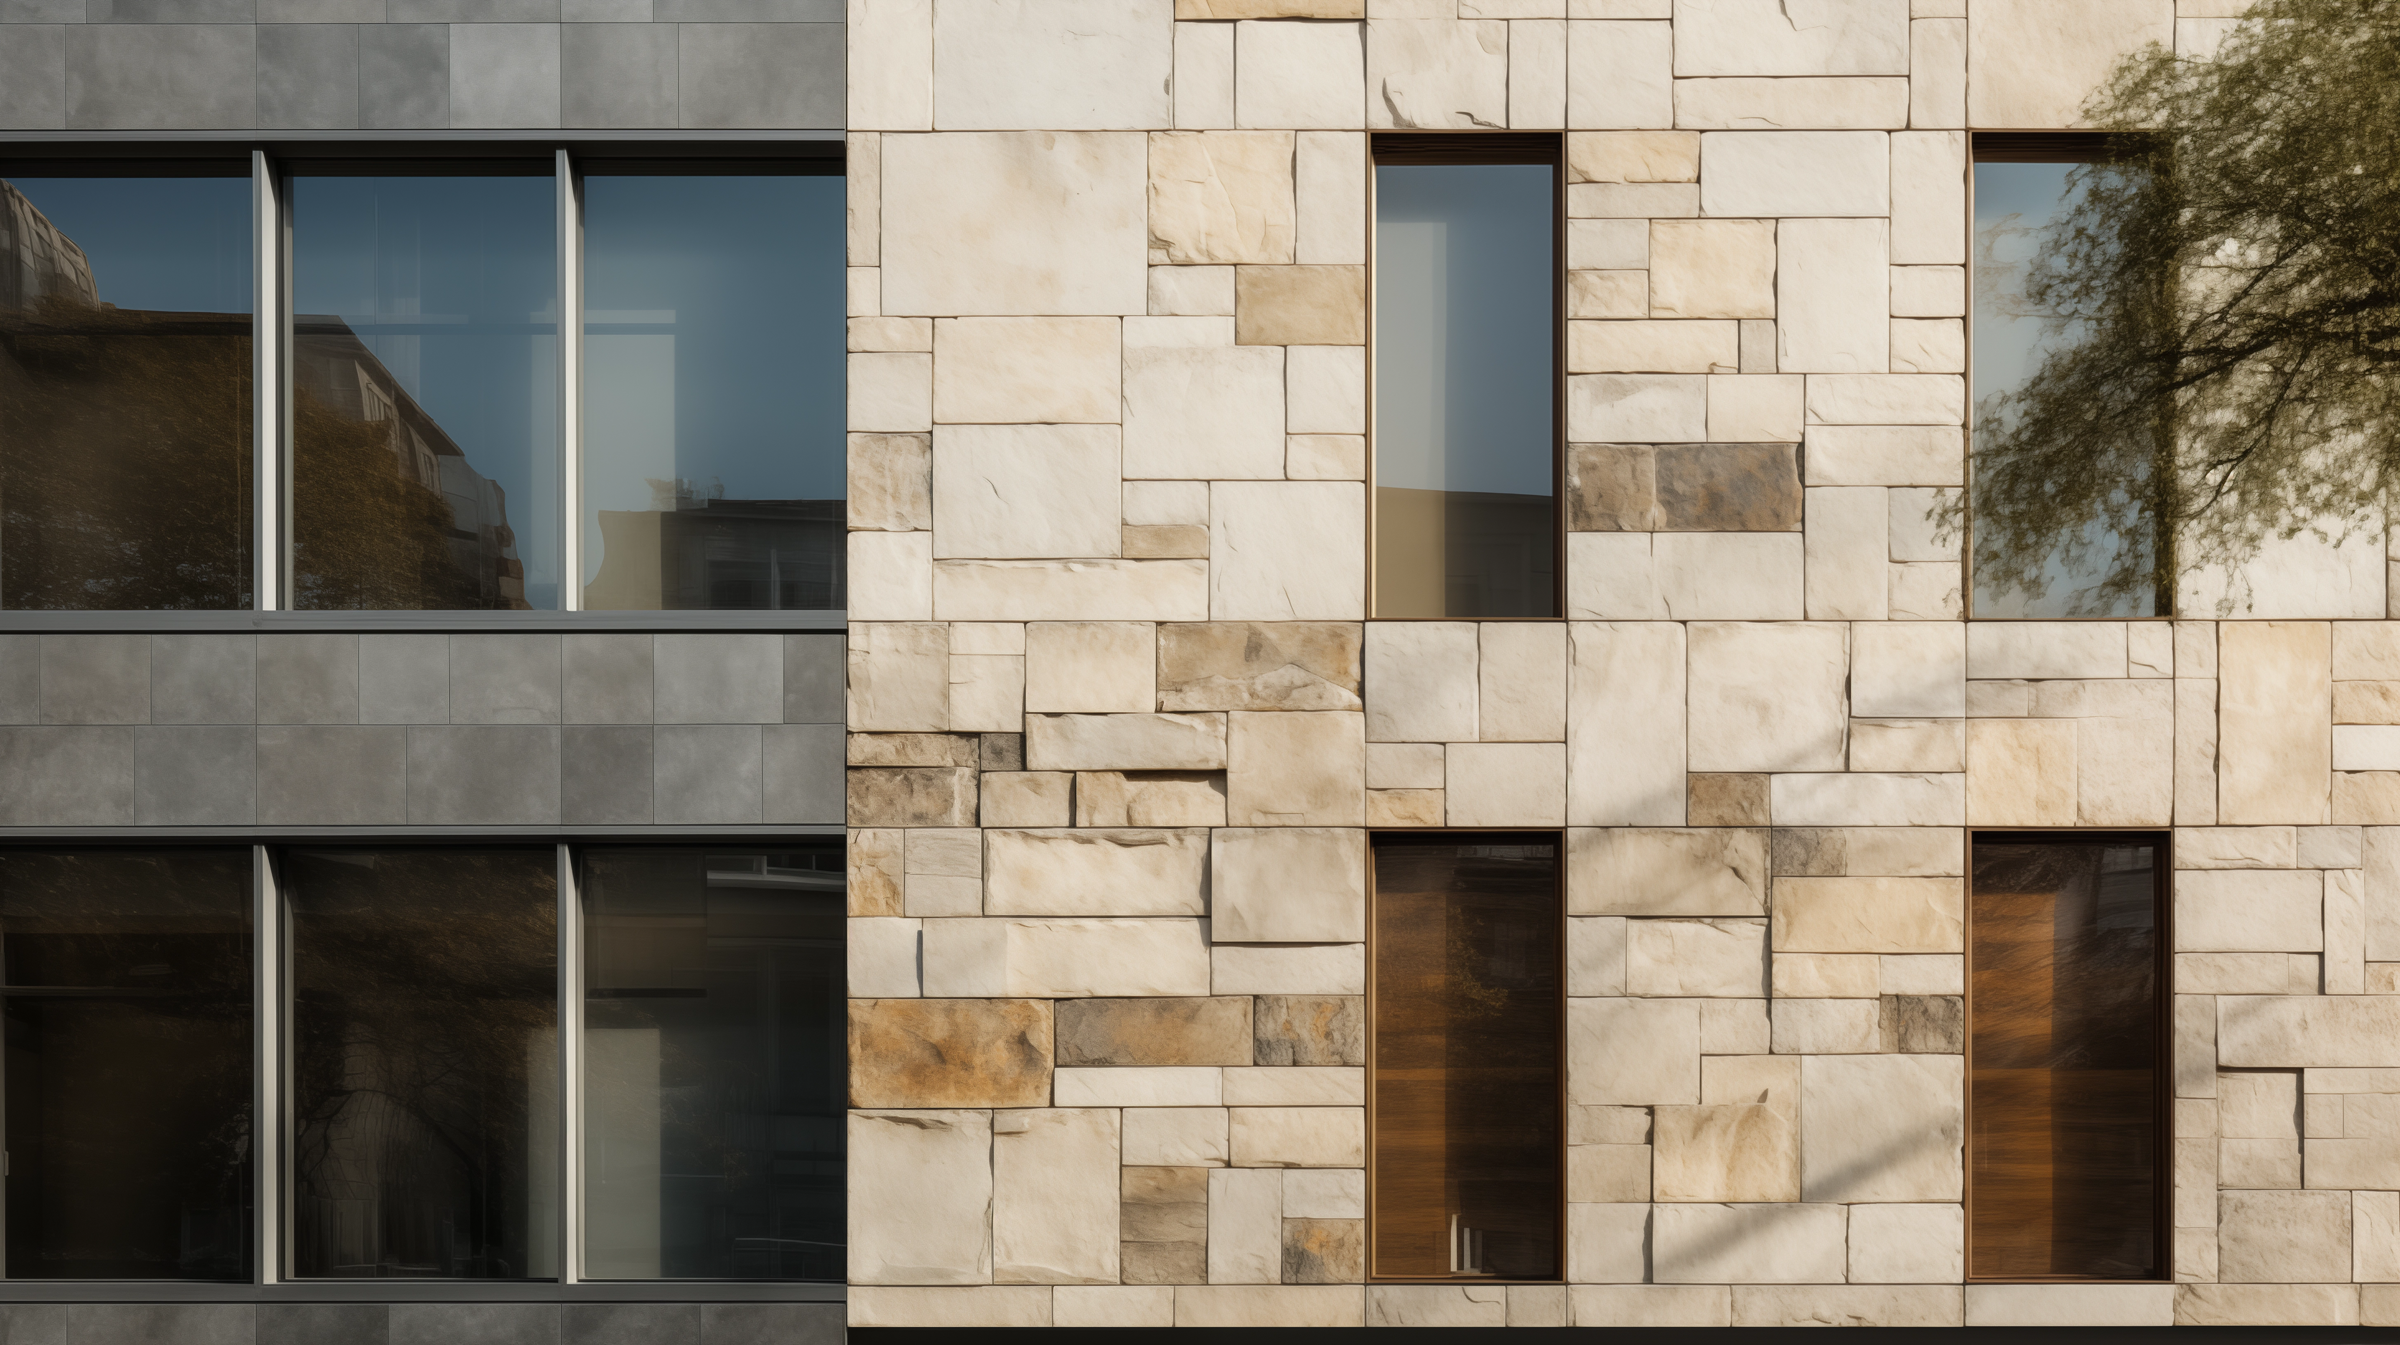 Side-by-side comparison of a building facade. The left side features thin stone veneers with a smooth, uniform appearance, while the right side showcases a robust, thick stone facade with varied textures and shades.